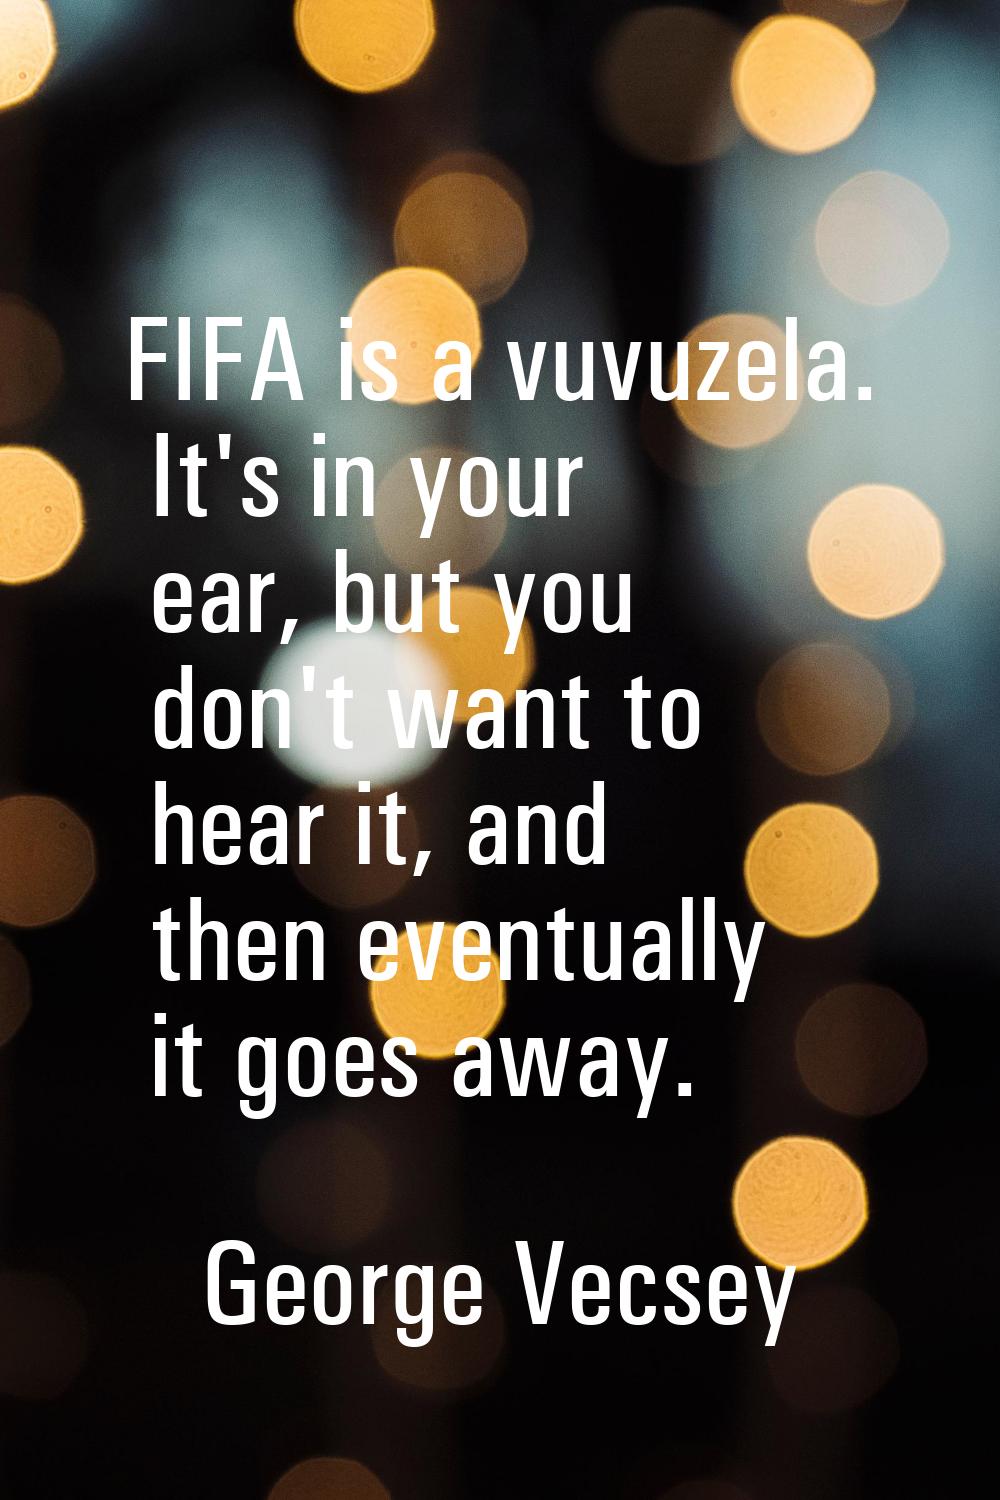 FIFA is a vuvuzela. It's in your ear, but you don't want to hear it, and then eventually it goes aw